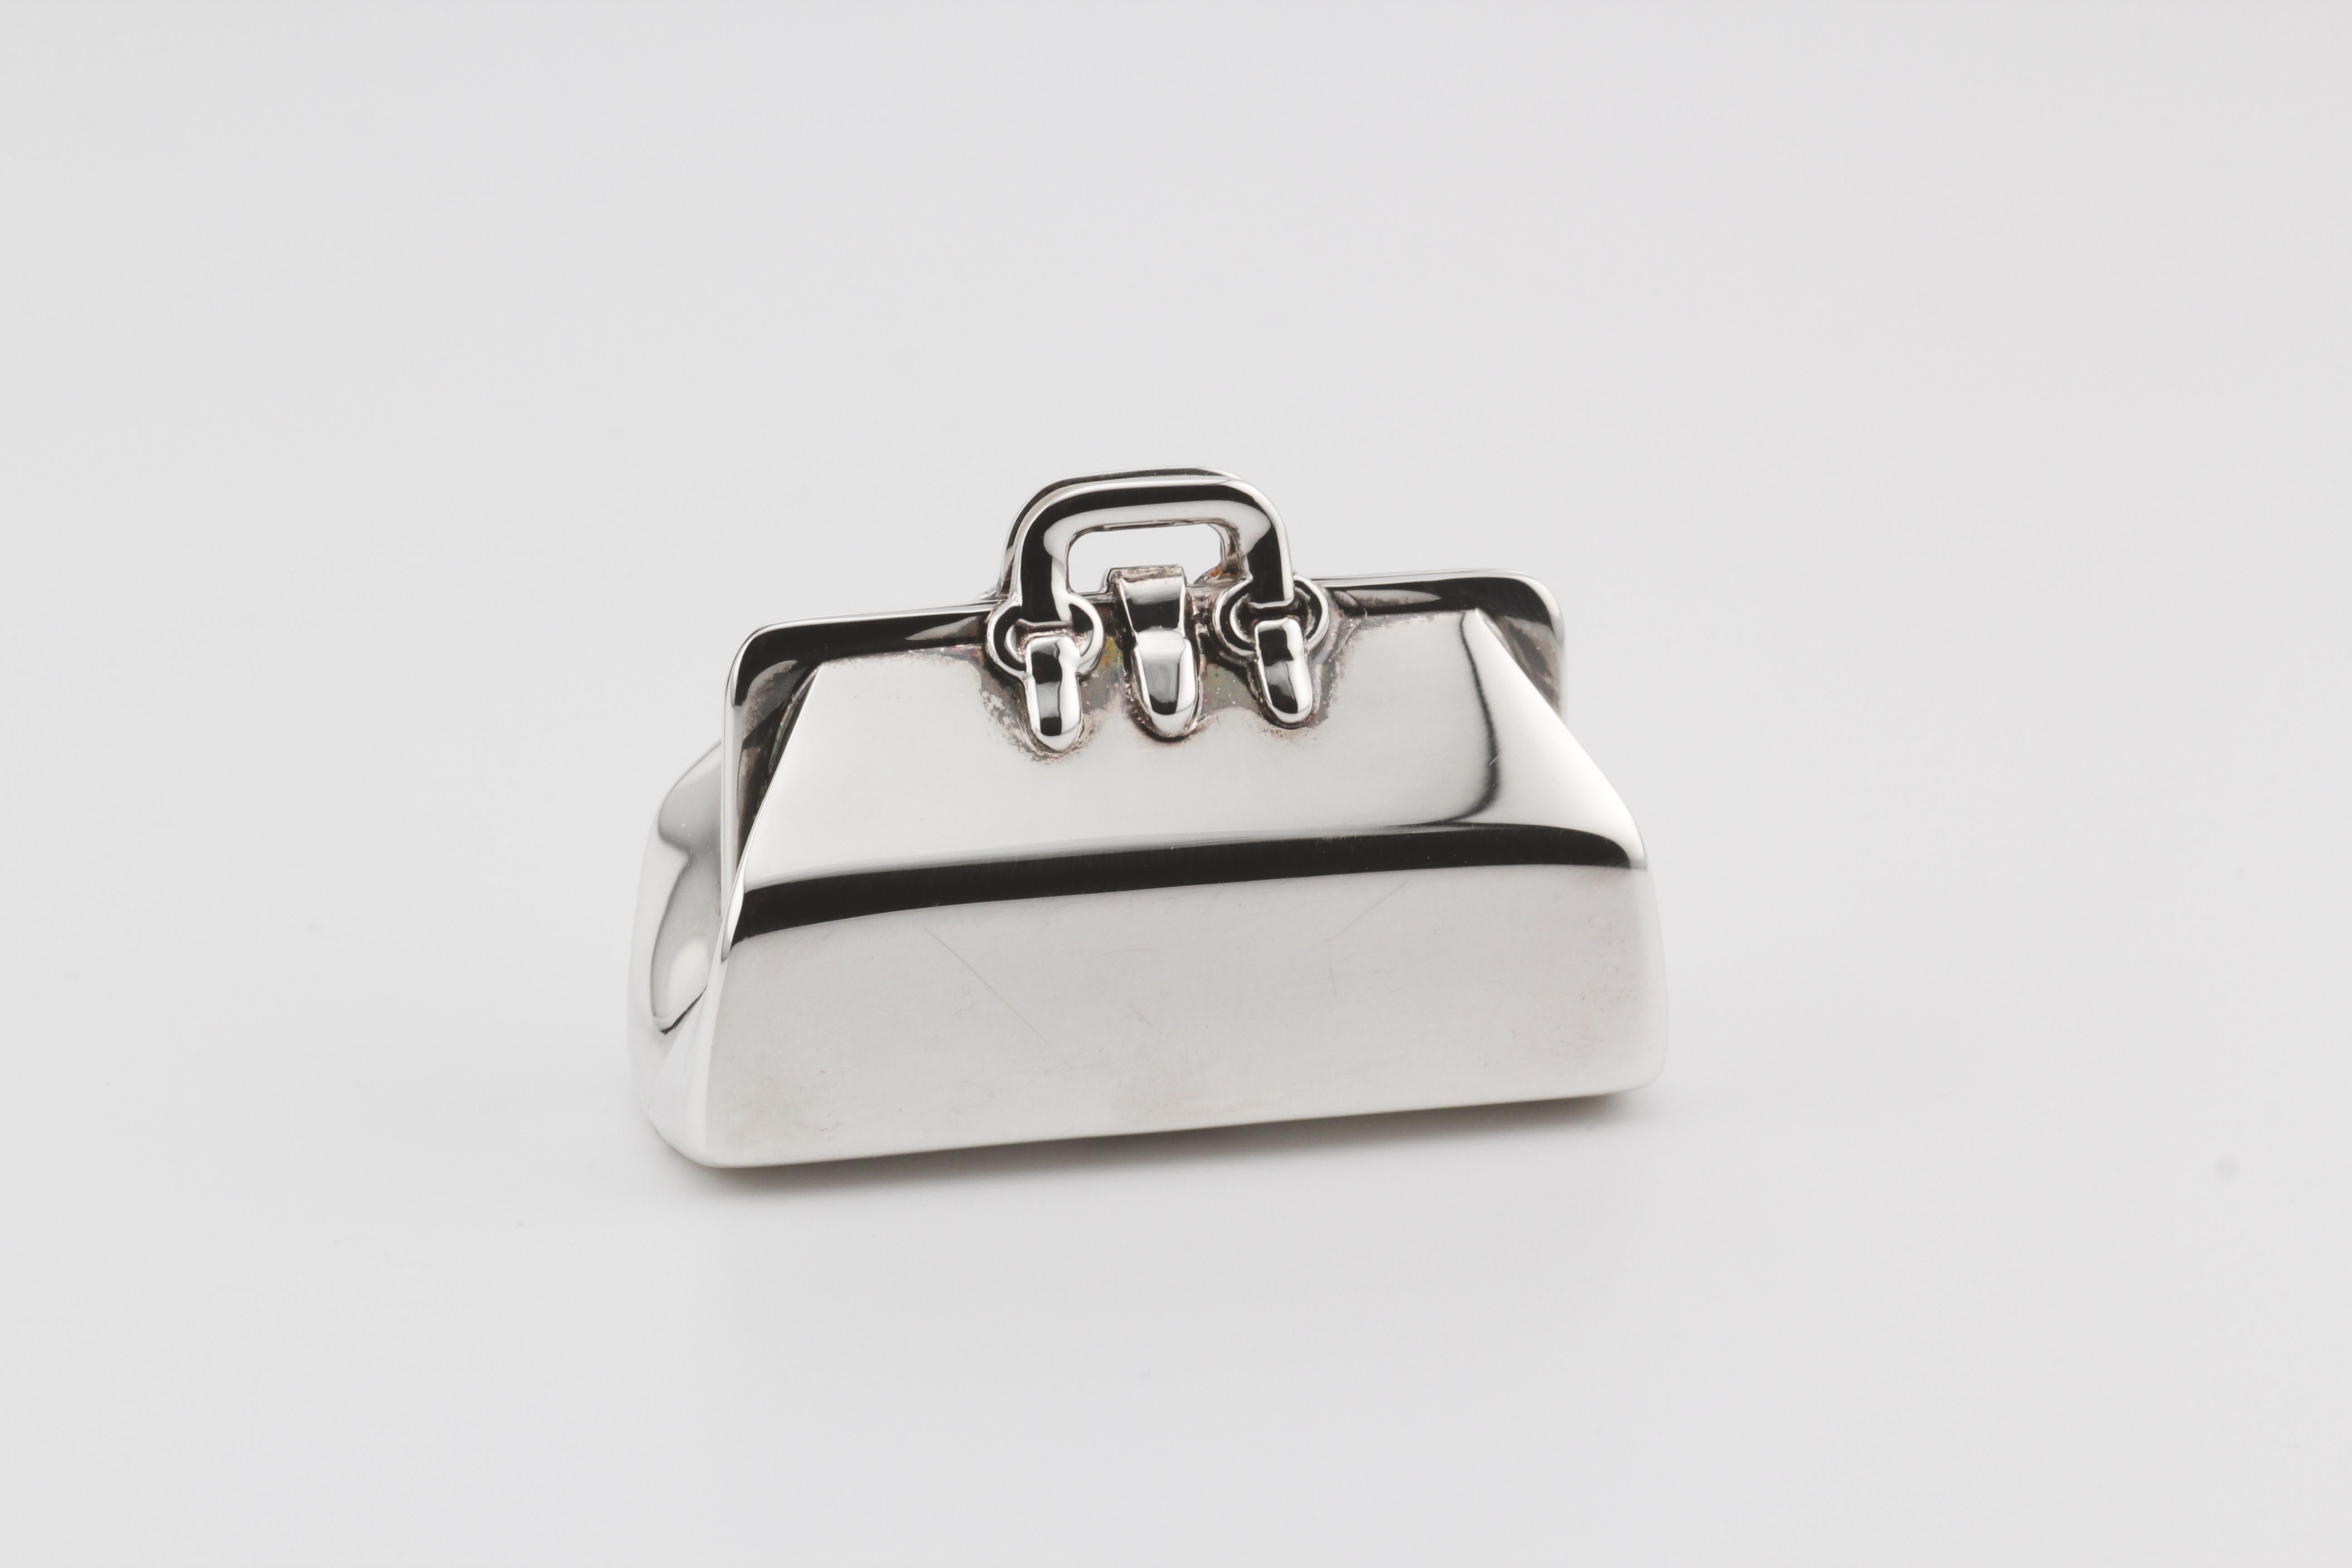 Introducing the Tiffany & Co. Doctor Bag Sterling Silver Pill Box—an exquisite blend of luxury and functionality. Crafted by the esteemed house of Tiffany & Co., this pill box takes inspiration from the iconic doctor bag, transforming it into a